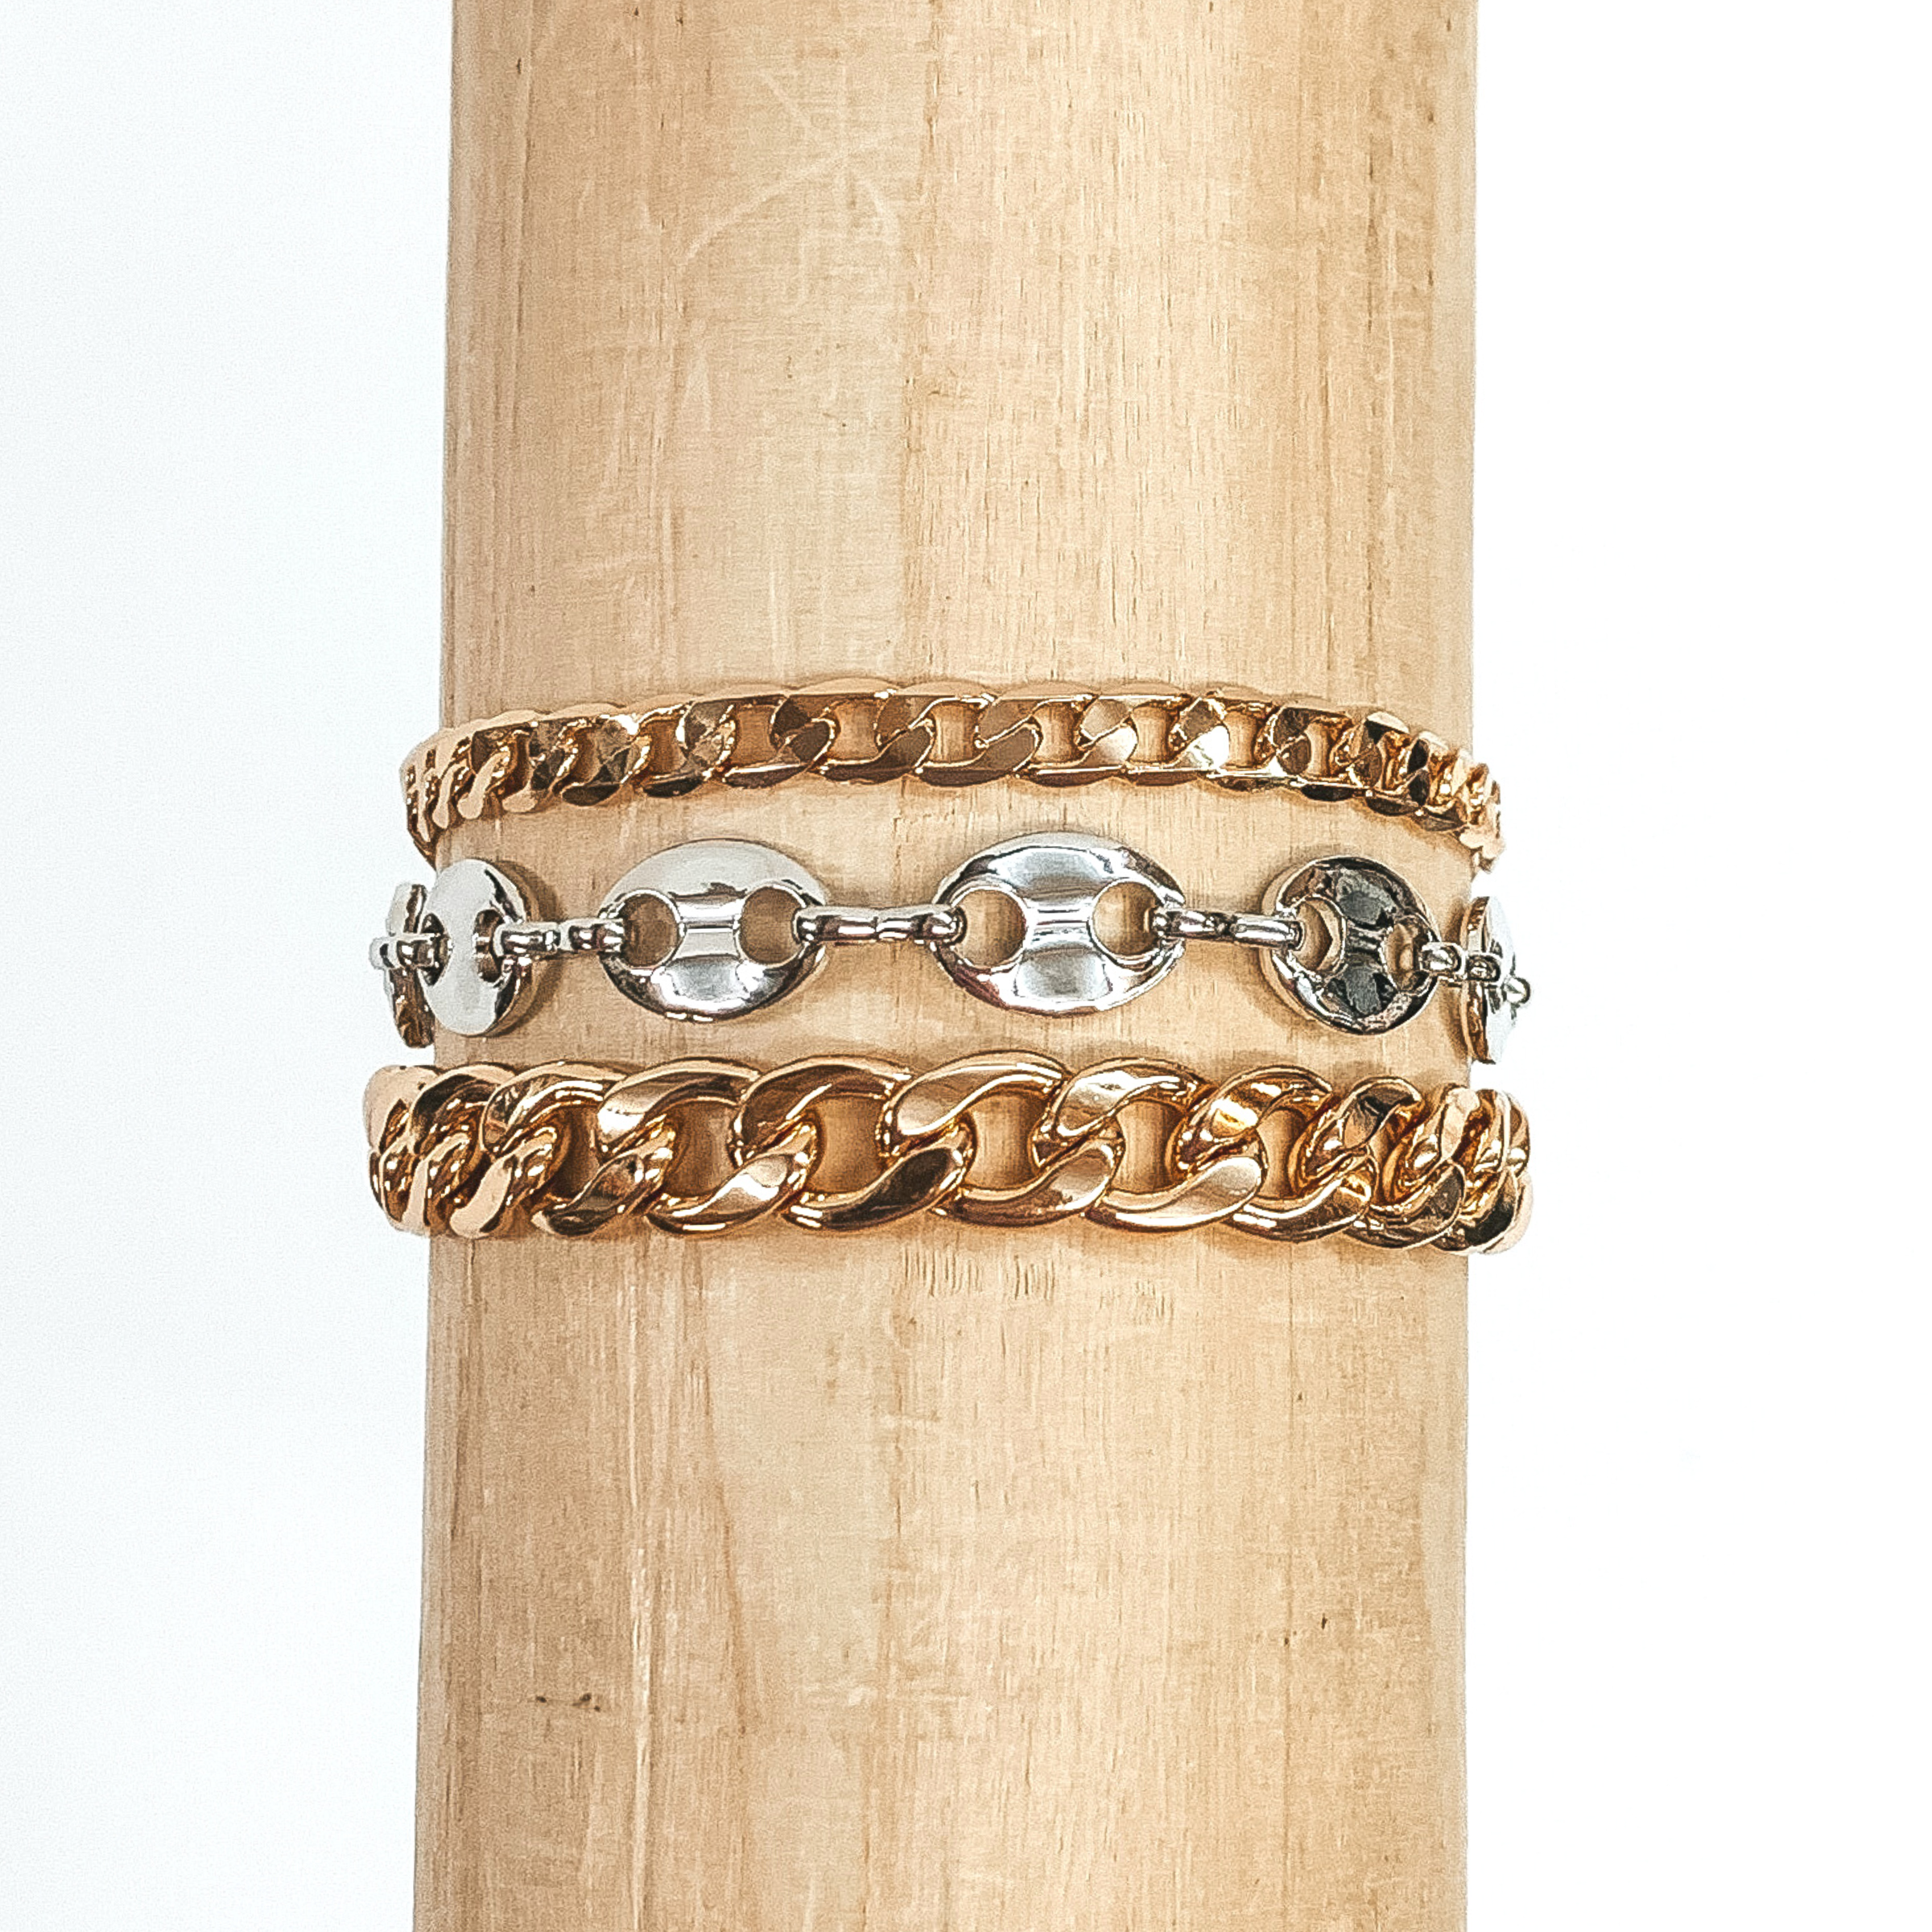 This bracelet includes a flat curb chain, a silver anchor chain, and a gold curb chain. This bracelet is wrapped around a piece of wood that is pictured on a white background. 